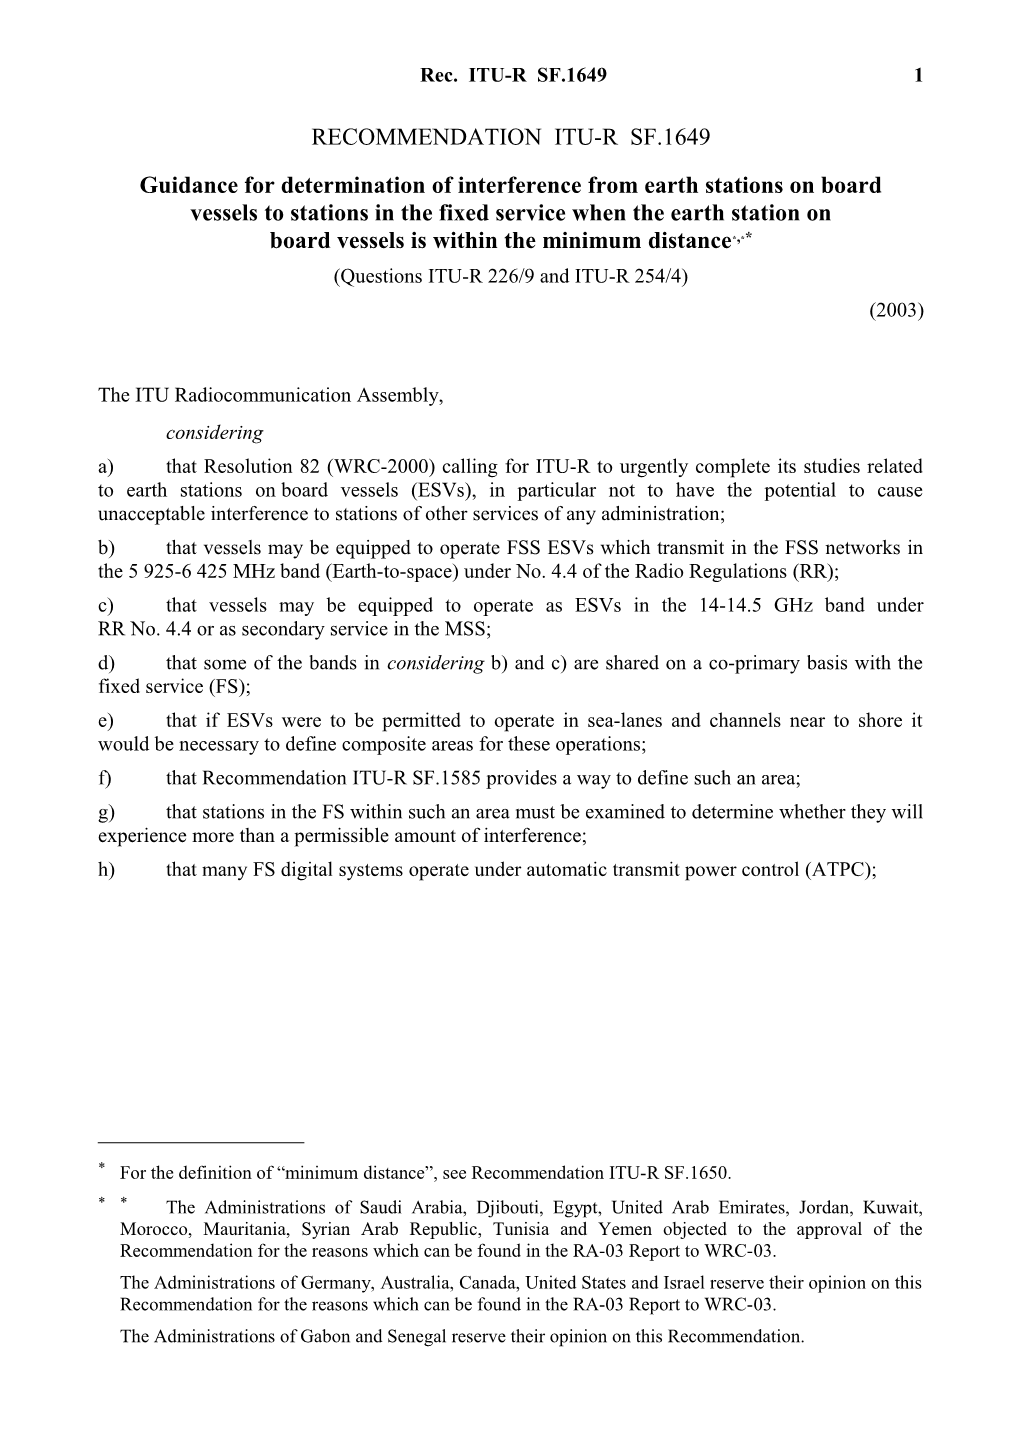 RECOMMENDATION ITU-R SF.1649 - Guidance for Determination of Interference from Earth Stations